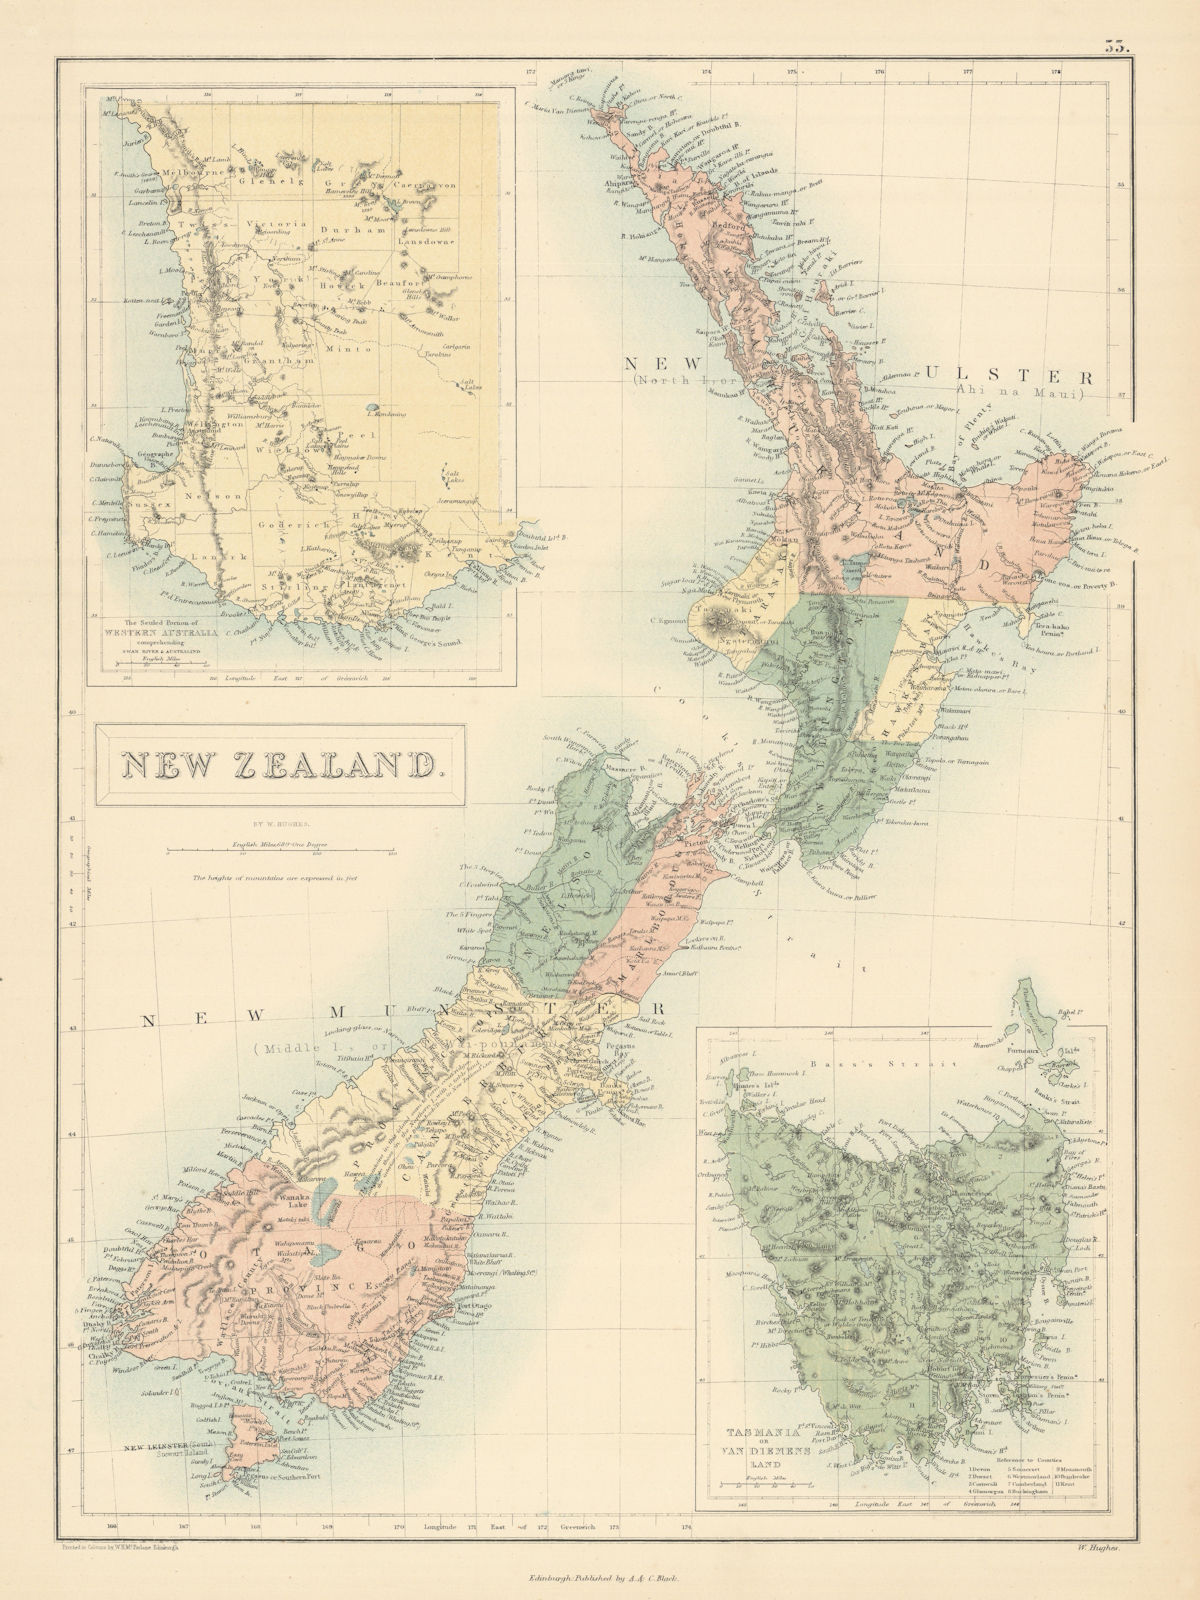 Associate Product New Zealand. New Ulster & New Munster. North & South Islands. HUGHES 1862 map